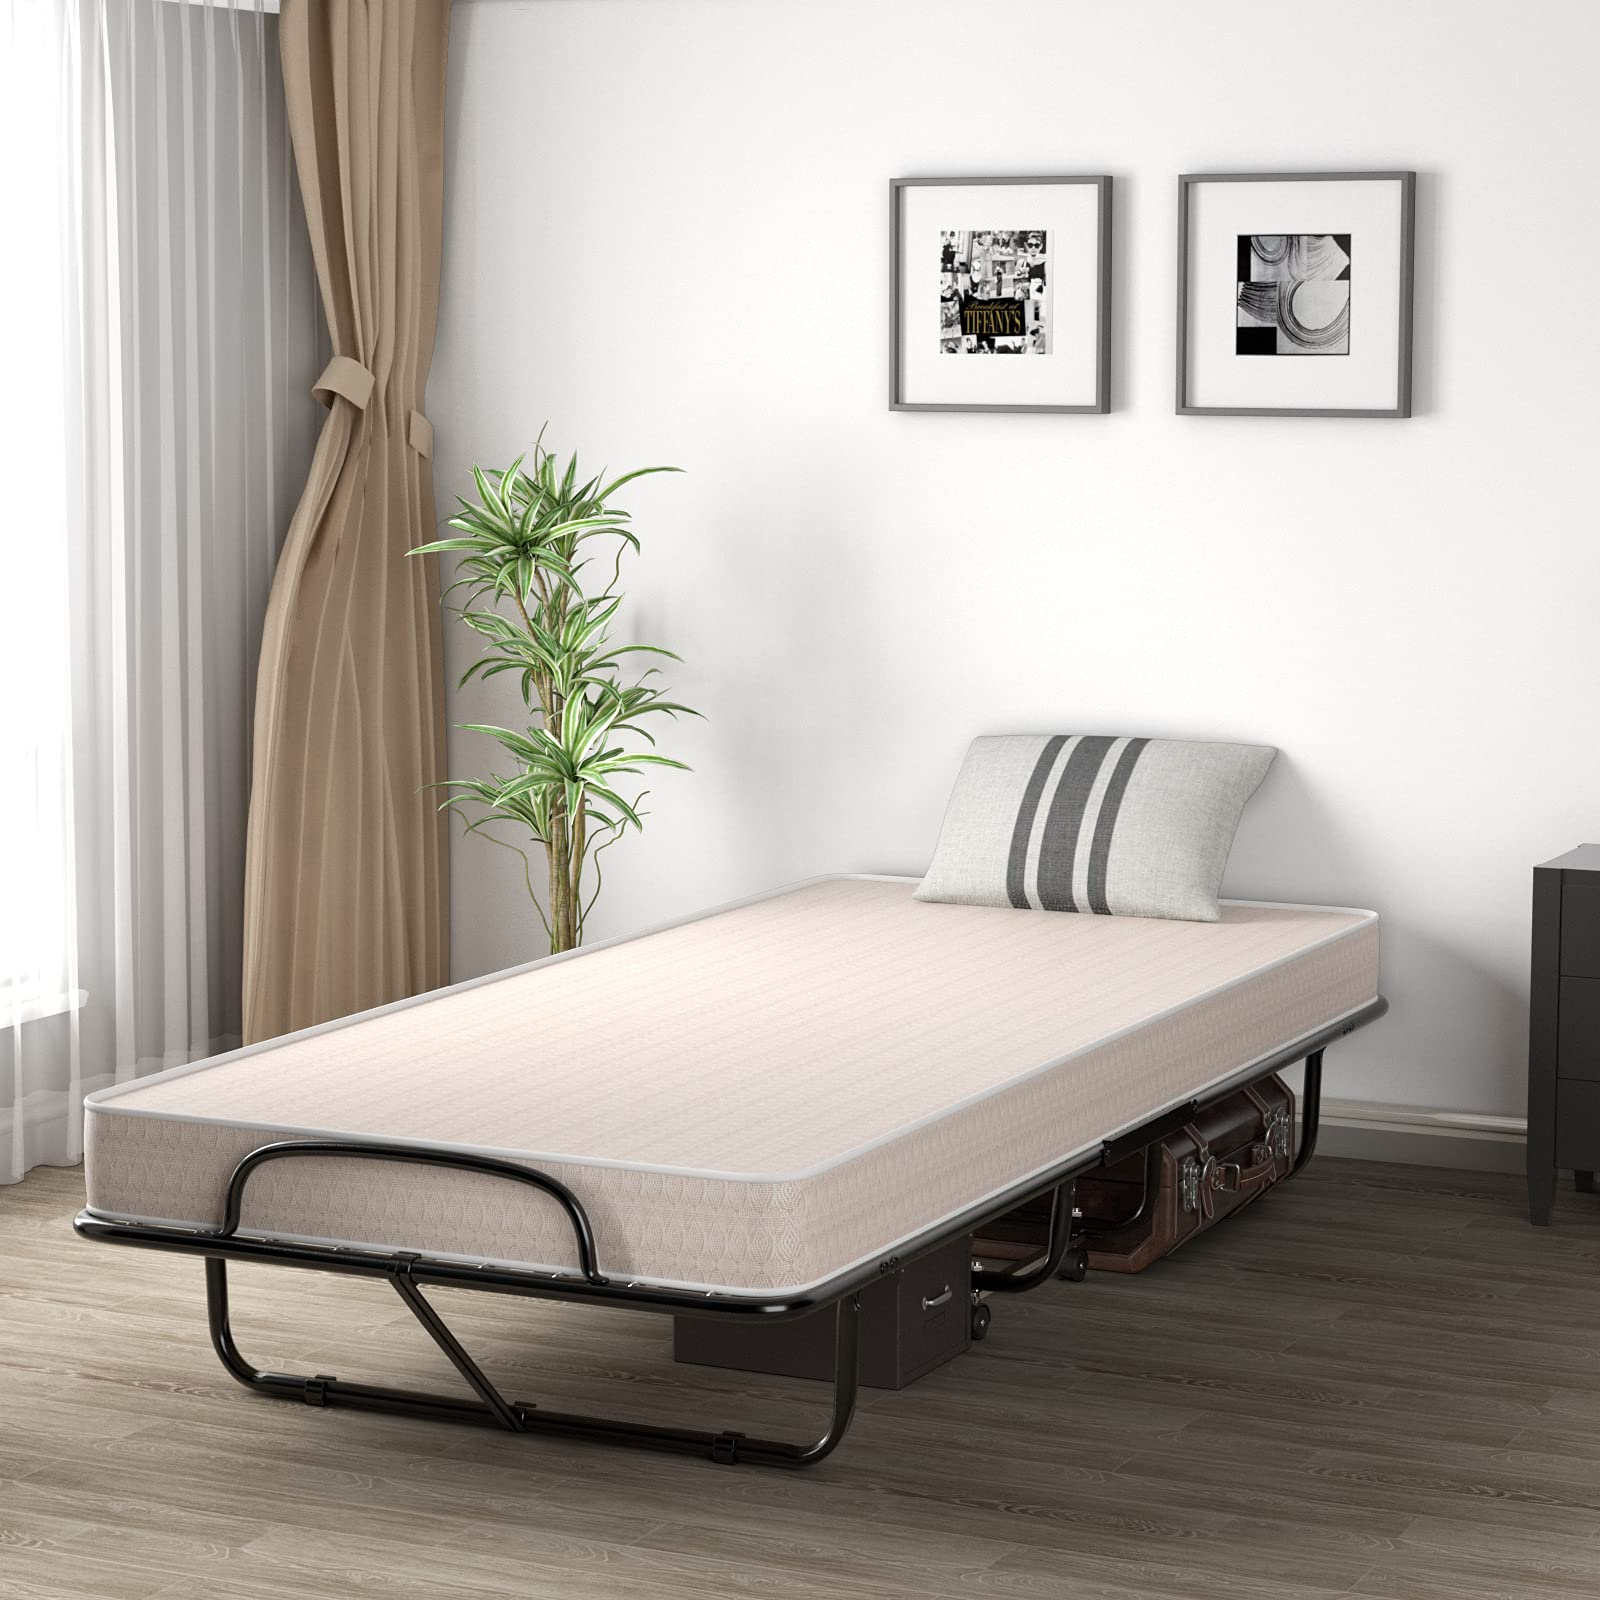 Giantex Rollaway Folding Bed w/Mattress for Adults, 79 x 39 Inch Twin Portable Foldable Guest Bed w/Sturdy Metal Frame